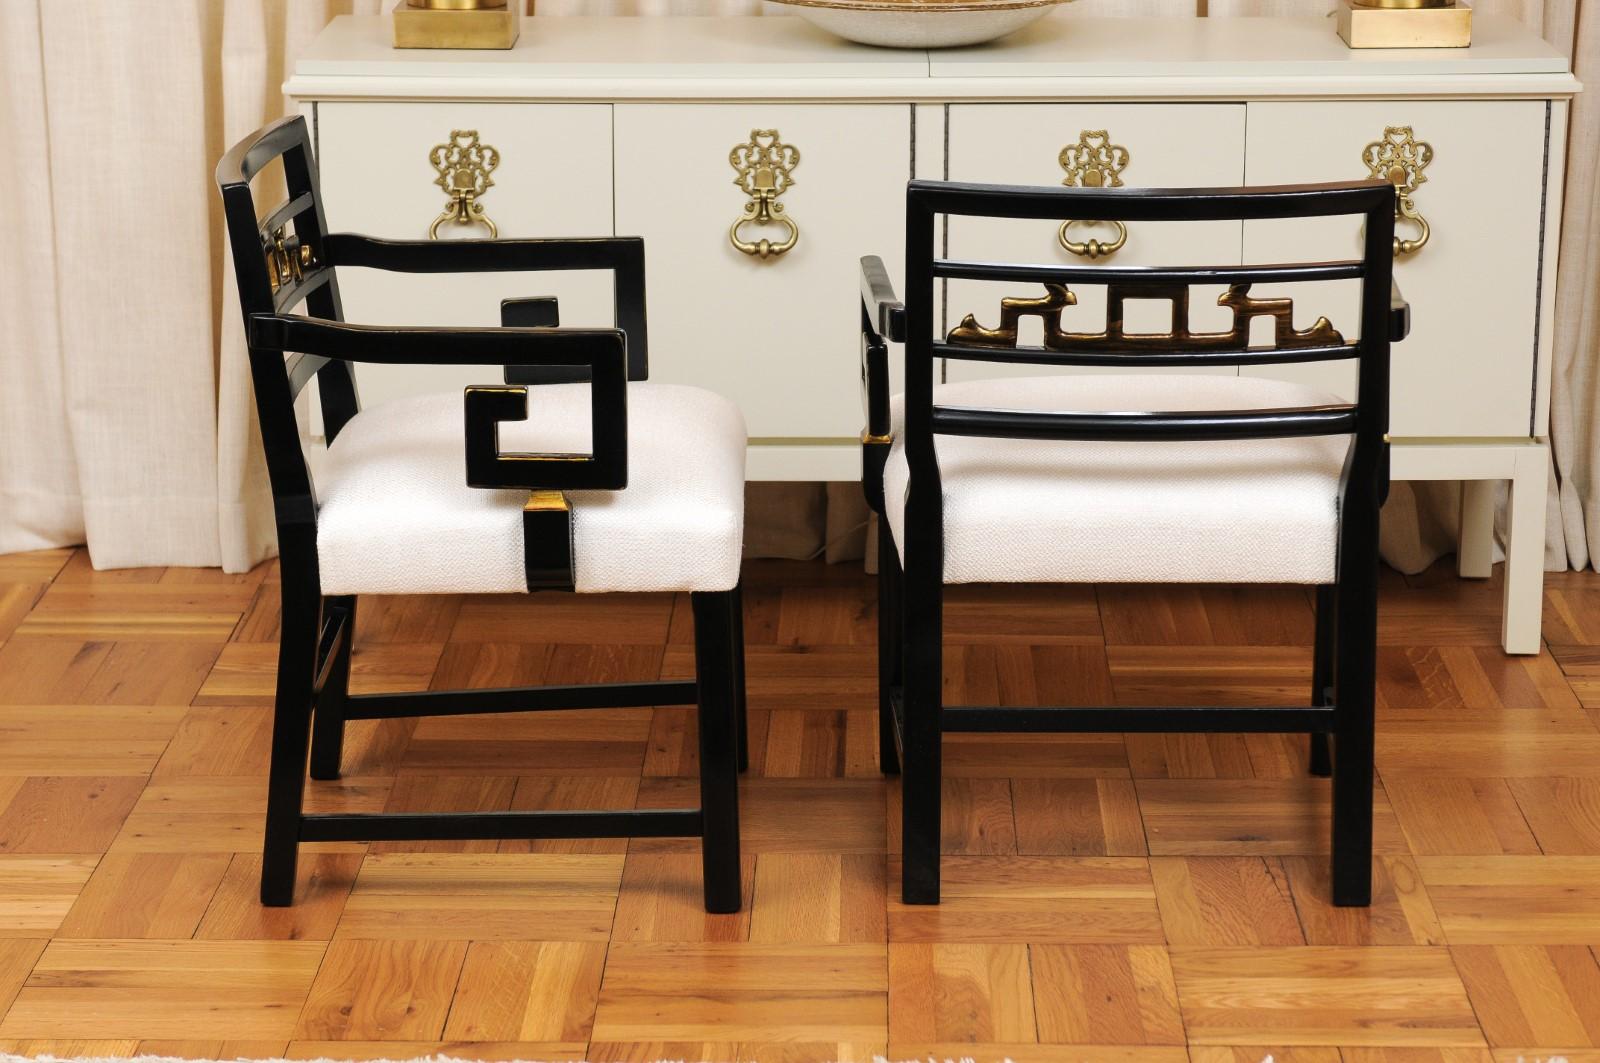 Exquisite Pair of Modern Chinoiserie Greek Key Armchairs by Baker, circa 1960 For Sale 2